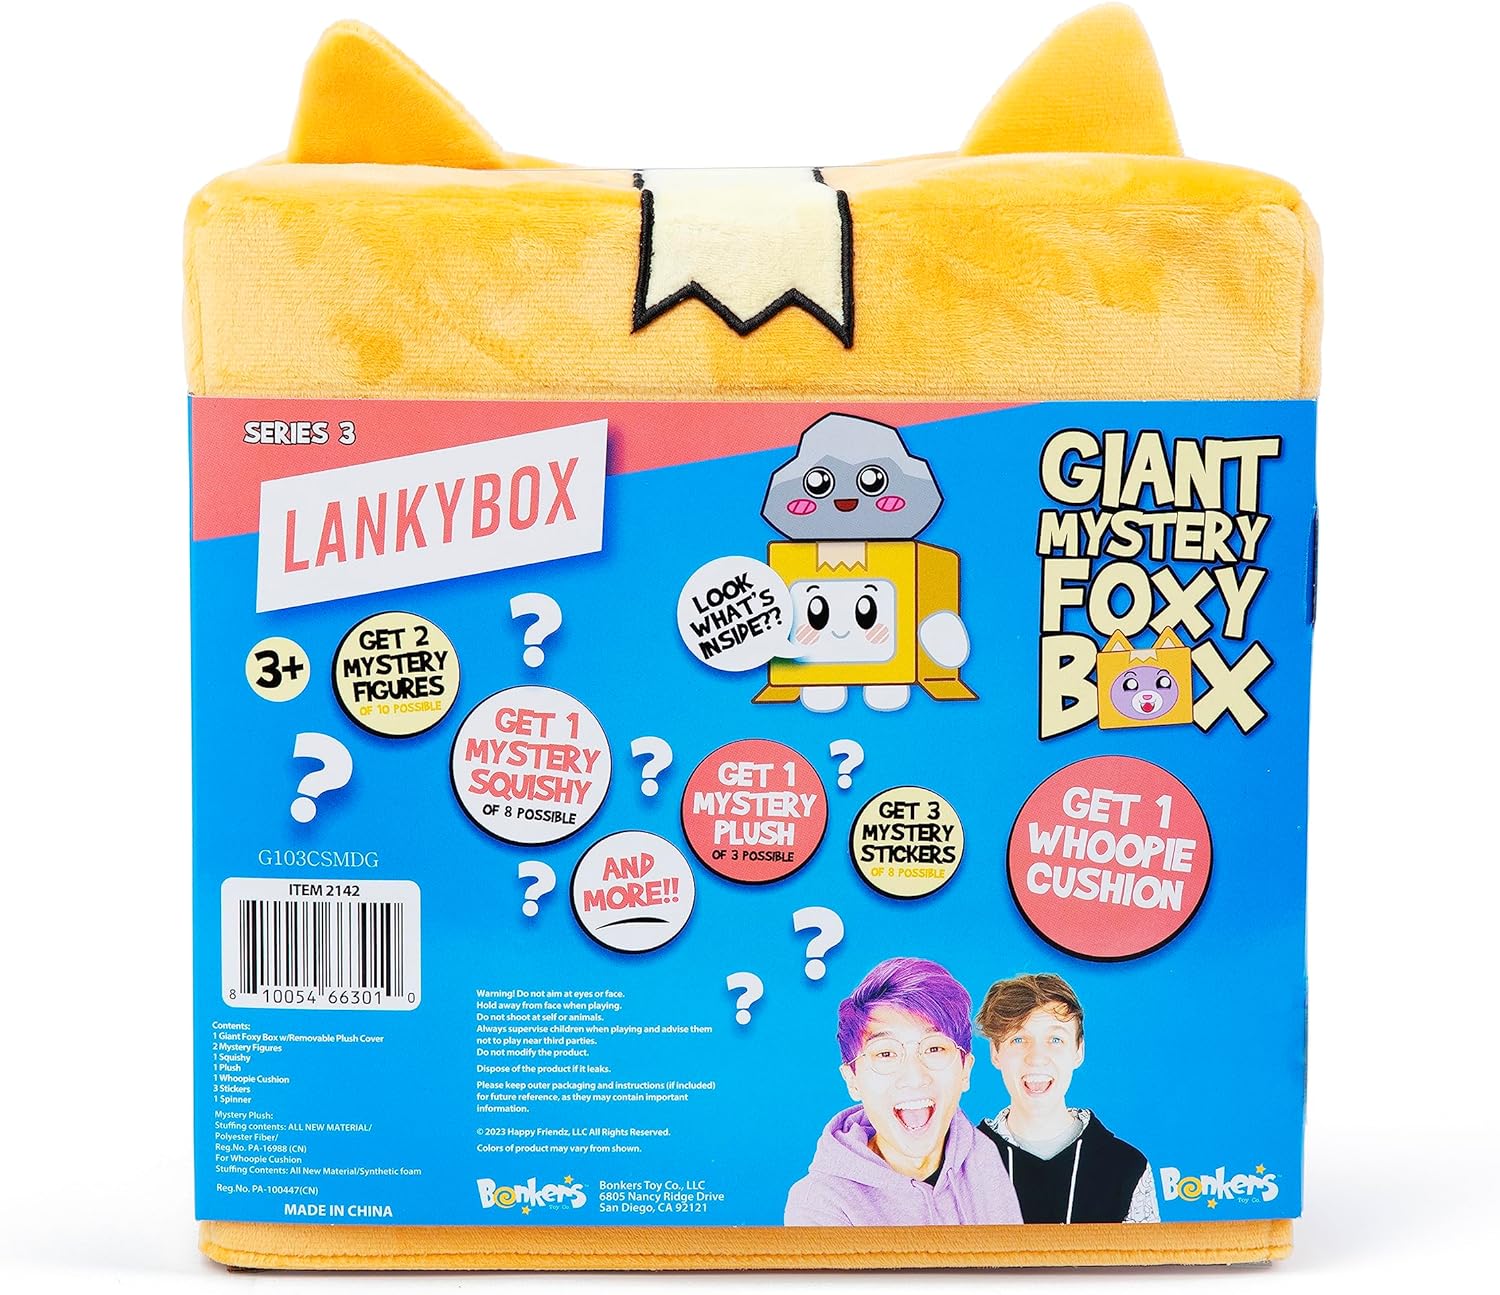 LankyBox Giant Foxy Mystery Box Foxy Mystery Box with 10 Exciting Toys to Discover Inside, Officially Licensed Merch